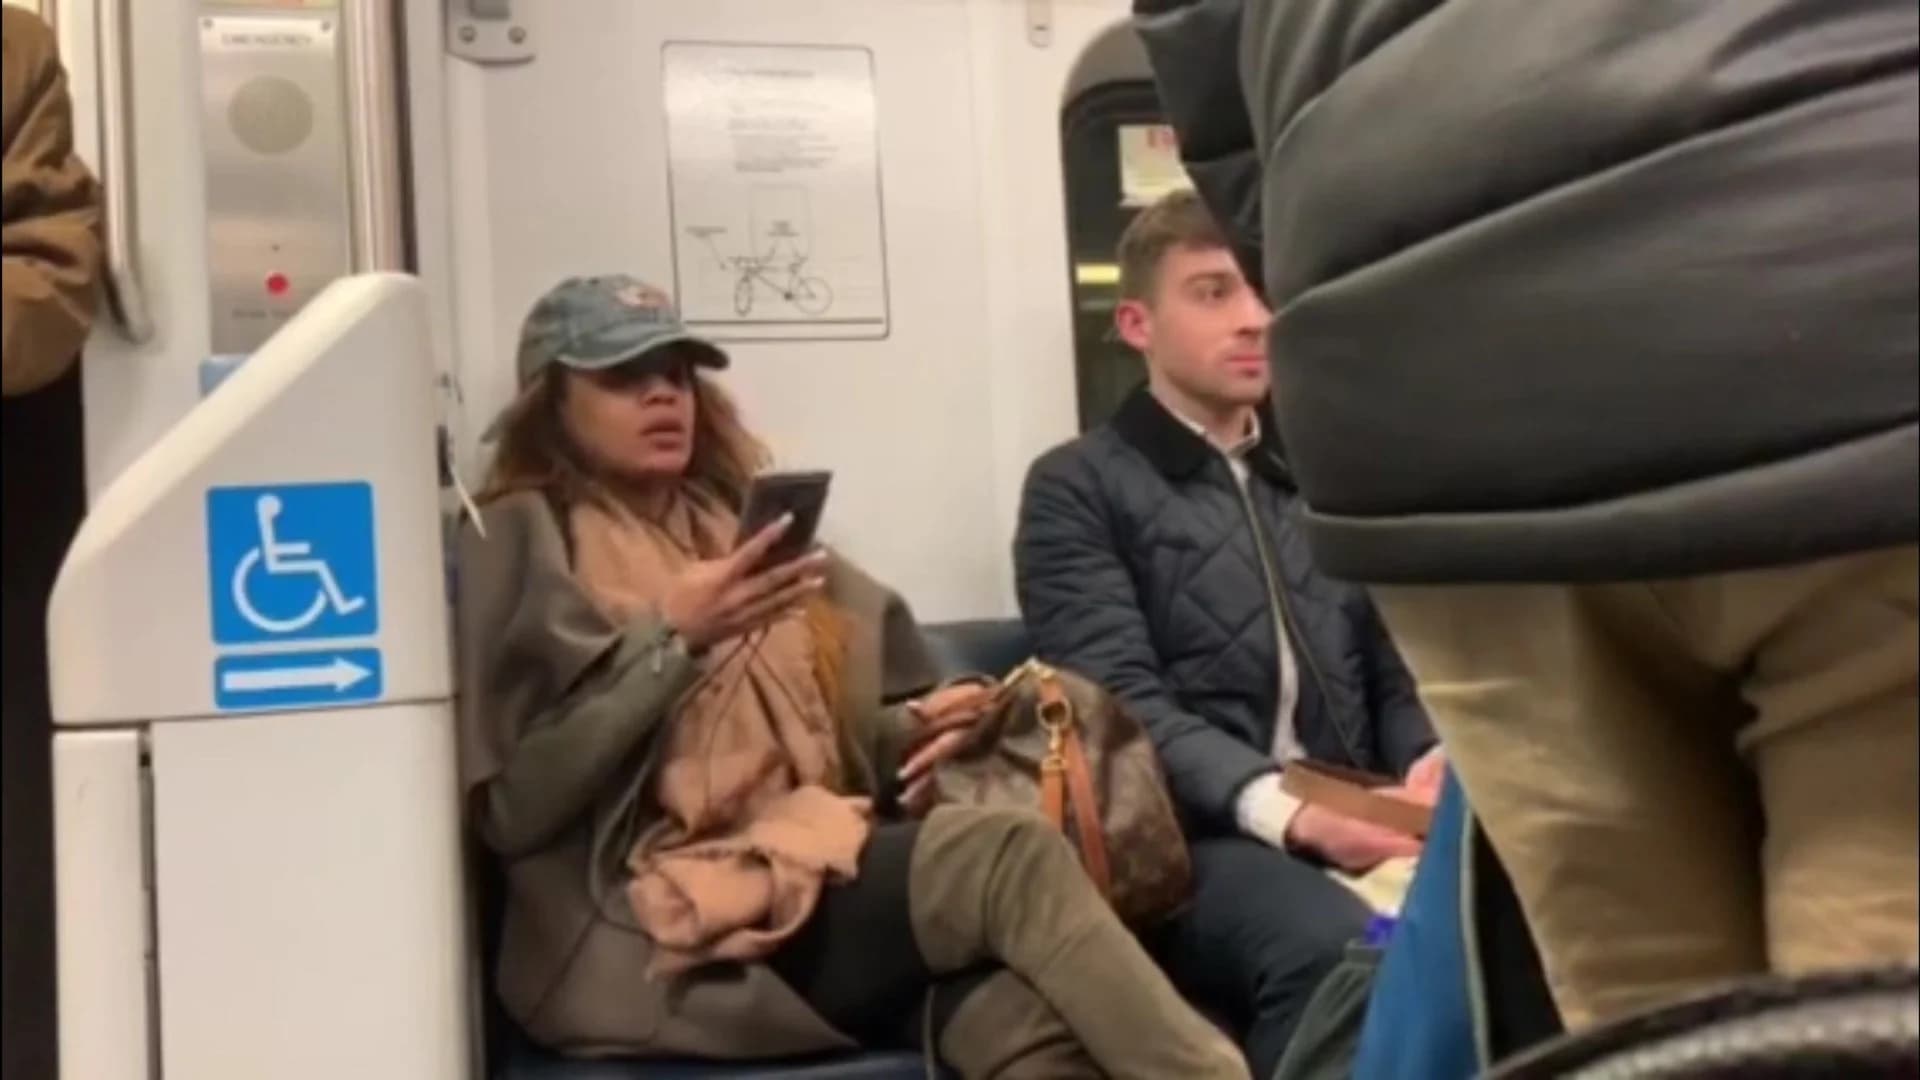 NJ Transit riders outraged over woman's refusal to move handbag